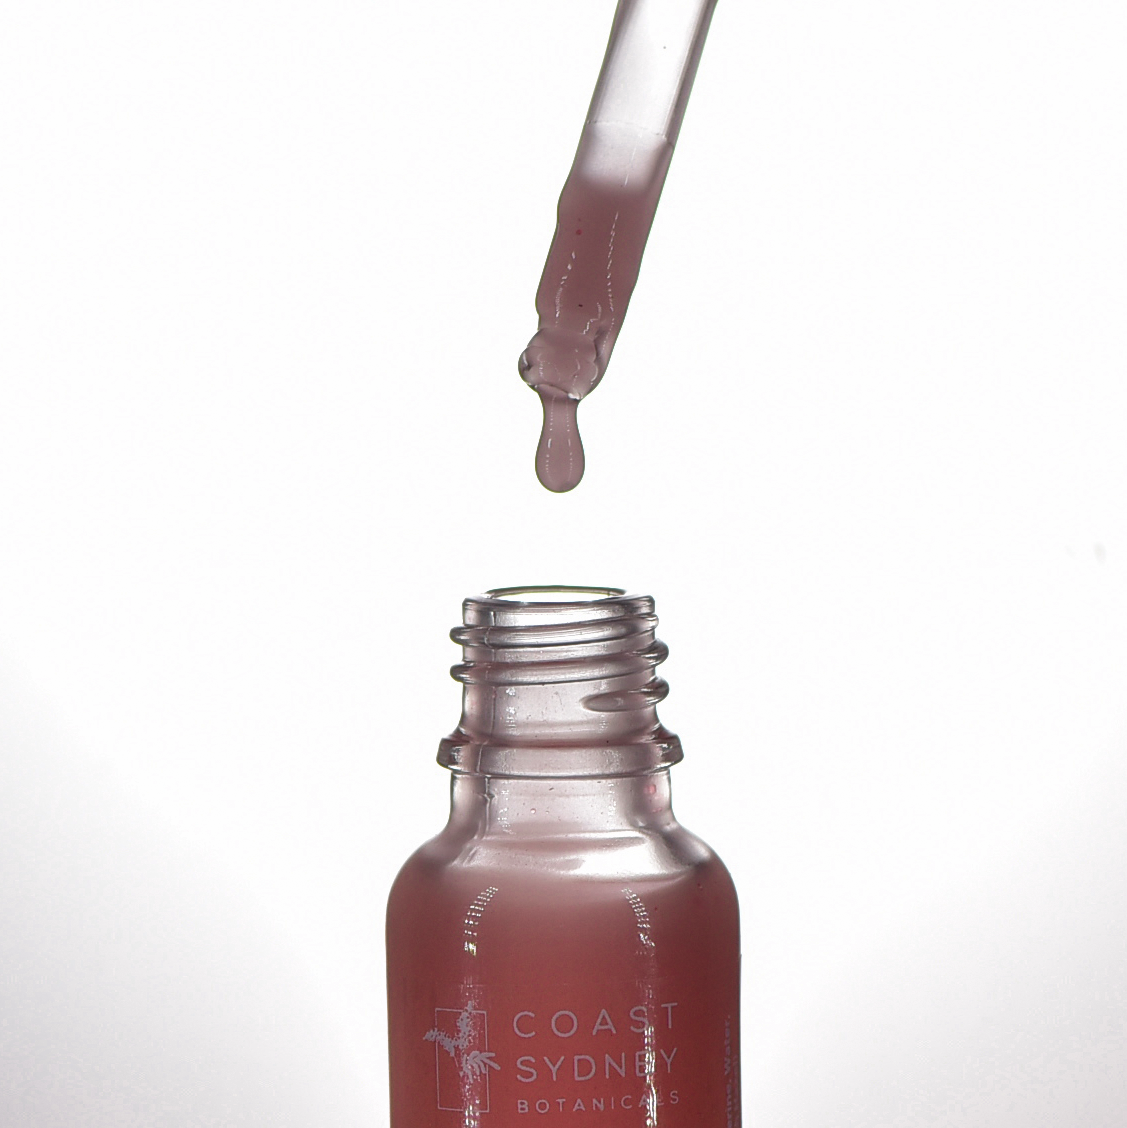 Close-up capturing the moment a serum droplet falls into the 'Simply Detox' face serum bottle as a dropper hovers above the open bottle, releasing a luxurious pink serum.